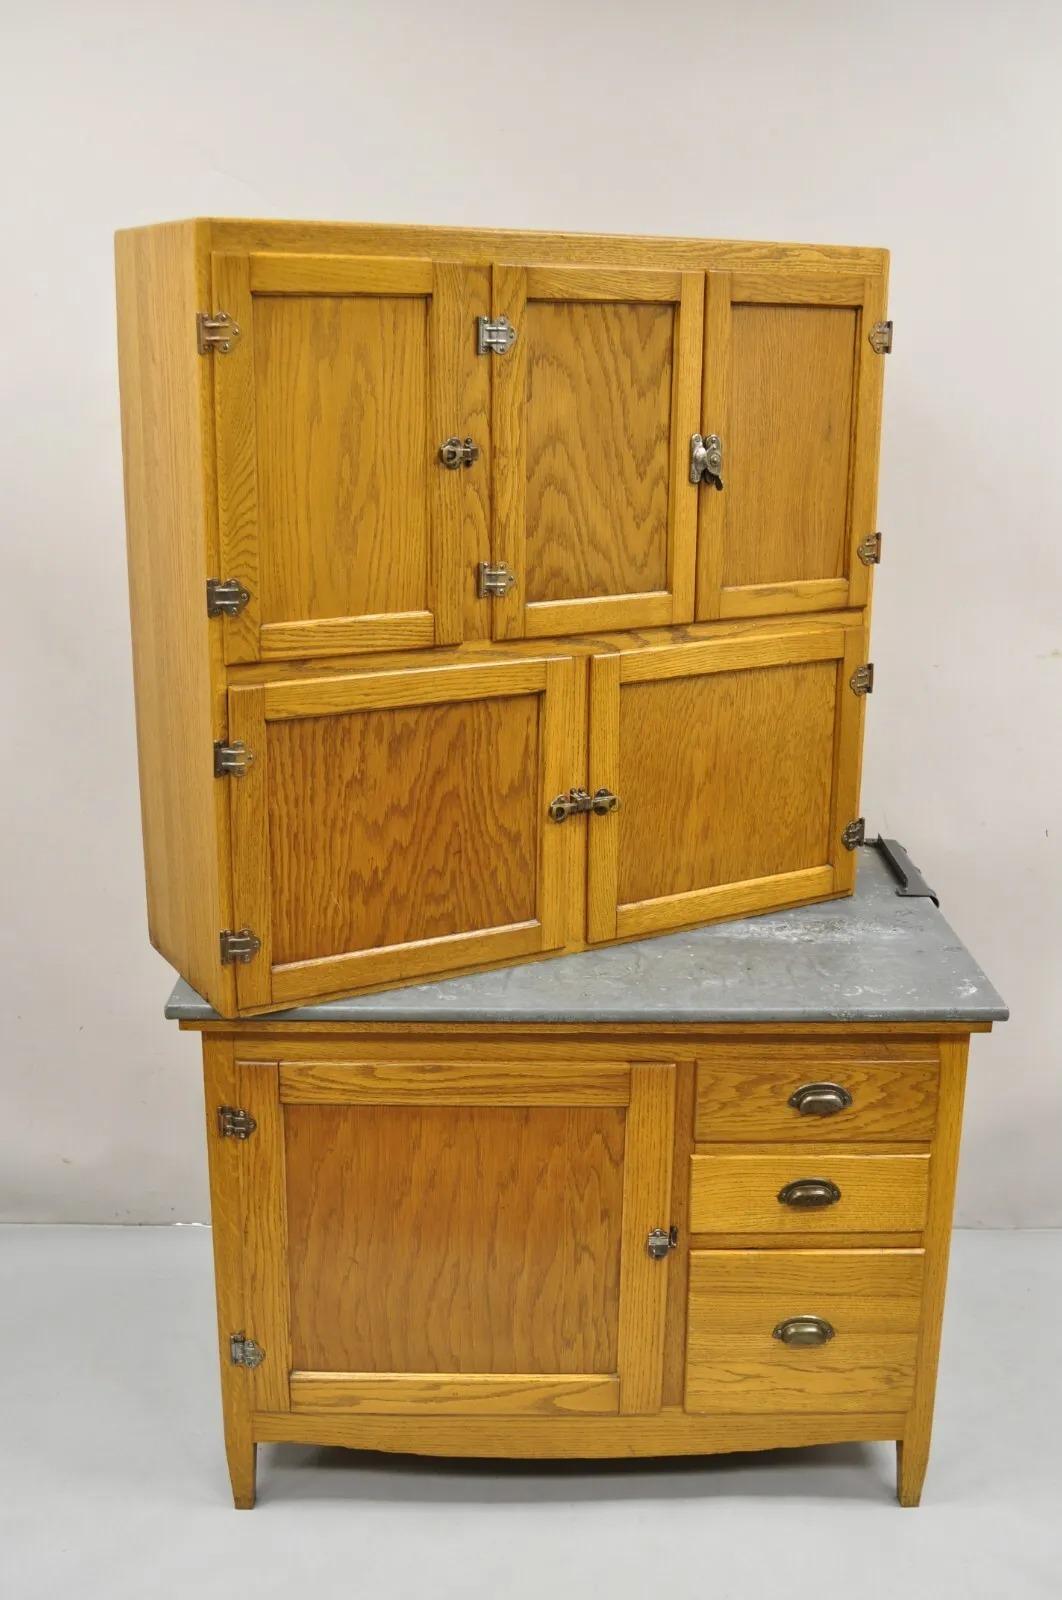 Antique Oak Wood Hoosier Style Cabinet Kitchen Cupboard with Pull Out Zinc Top 7